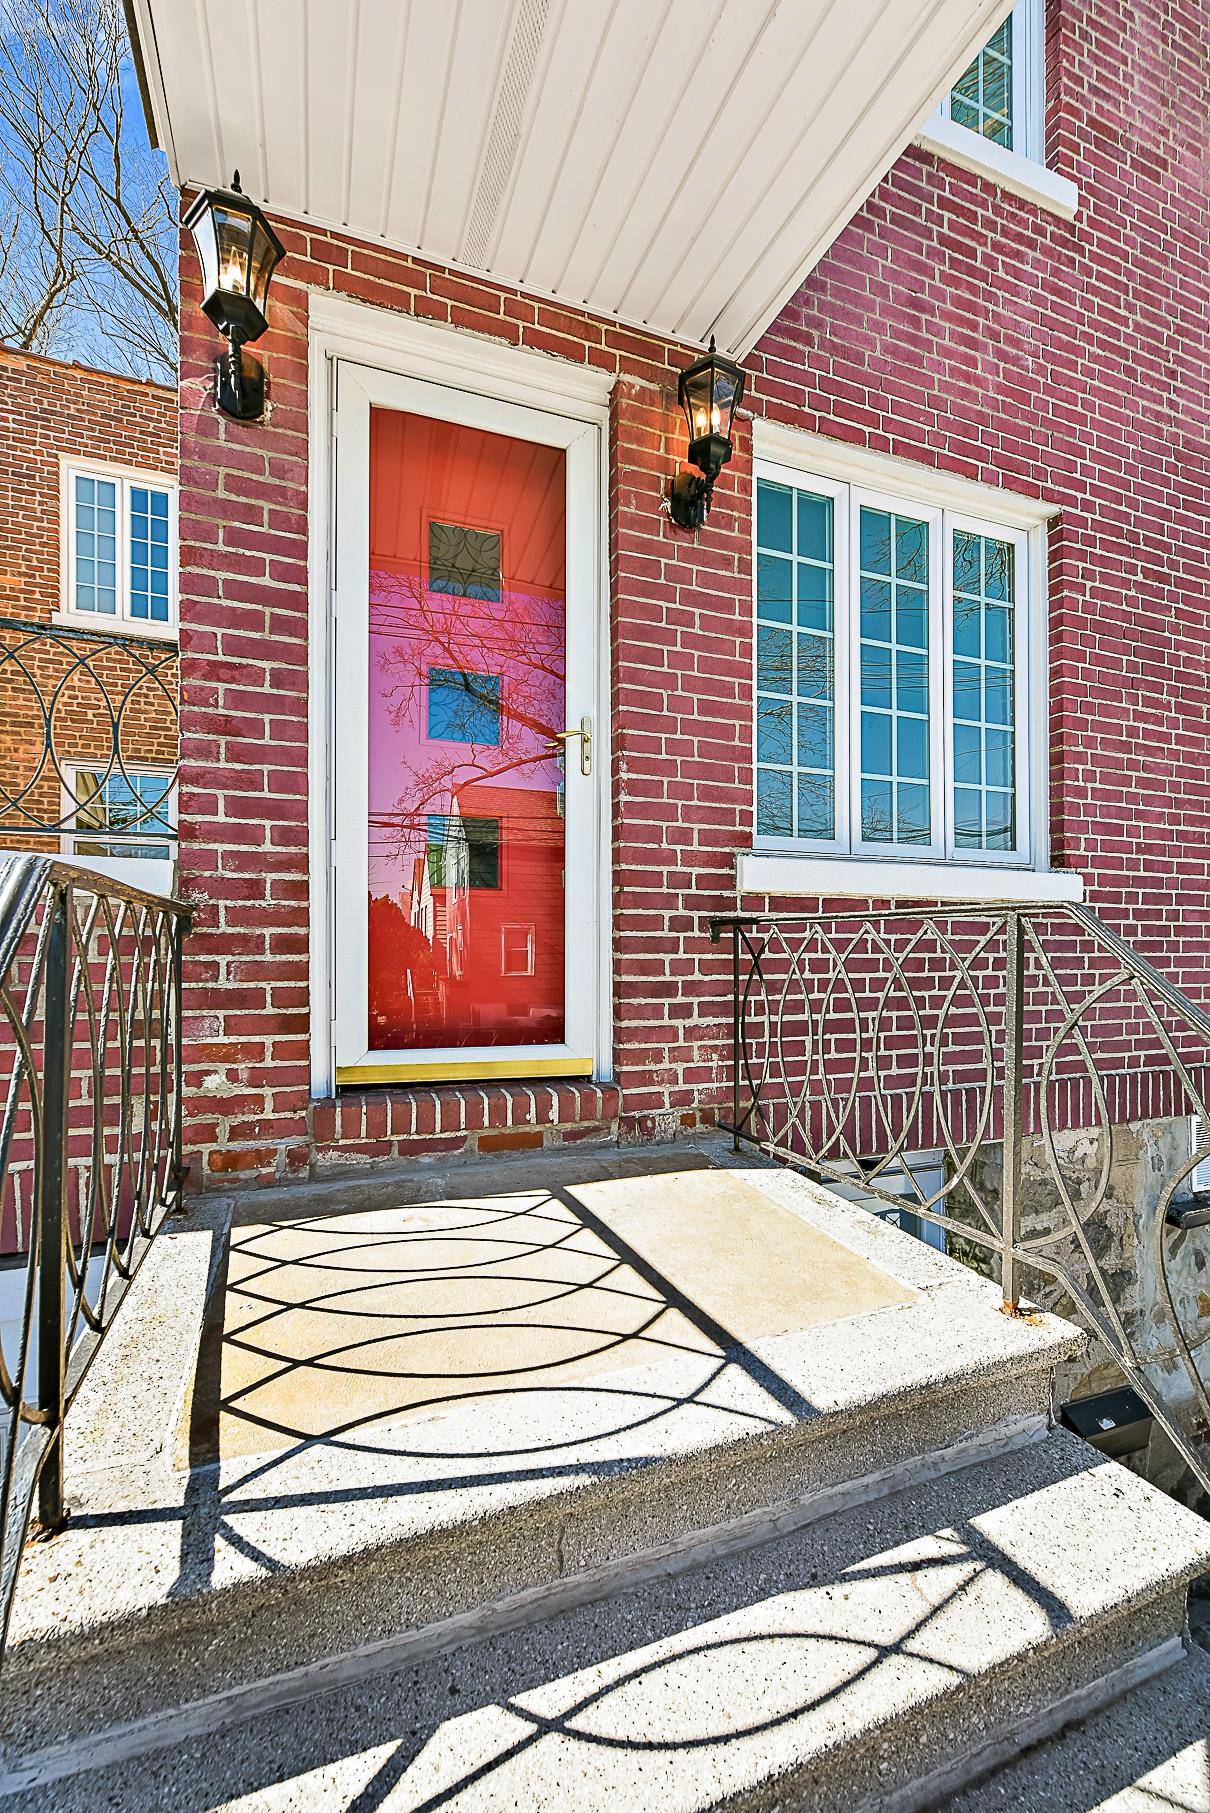 Move in ready, renovated red brick charming home with terrace, patio, fireplace and garage.